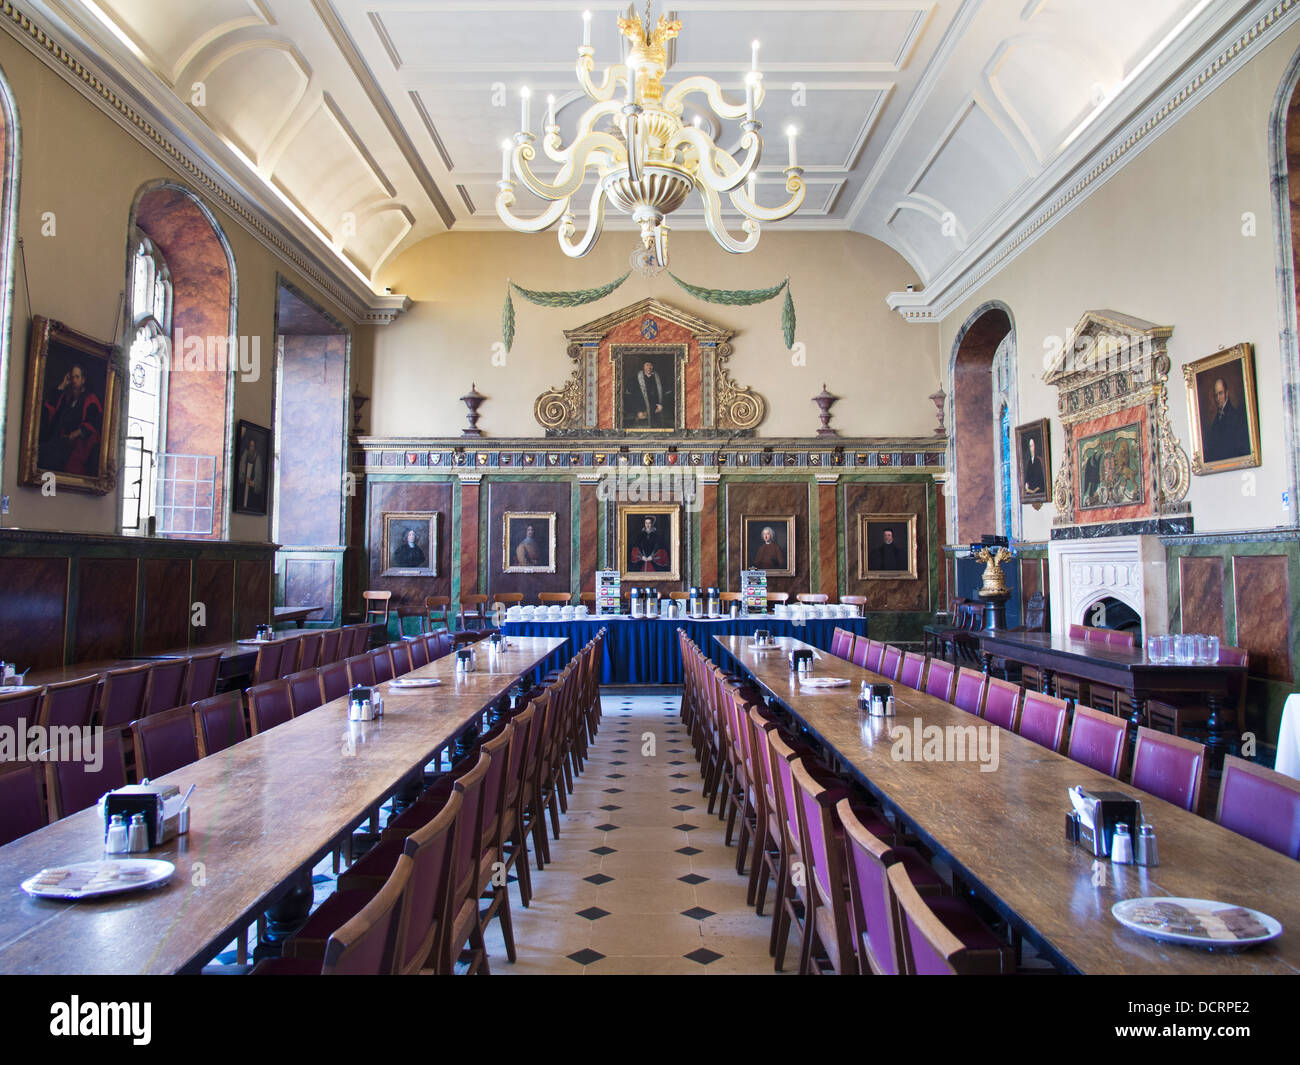 The Dining Hall of Trinity College, Oxford 1 Stock Photo